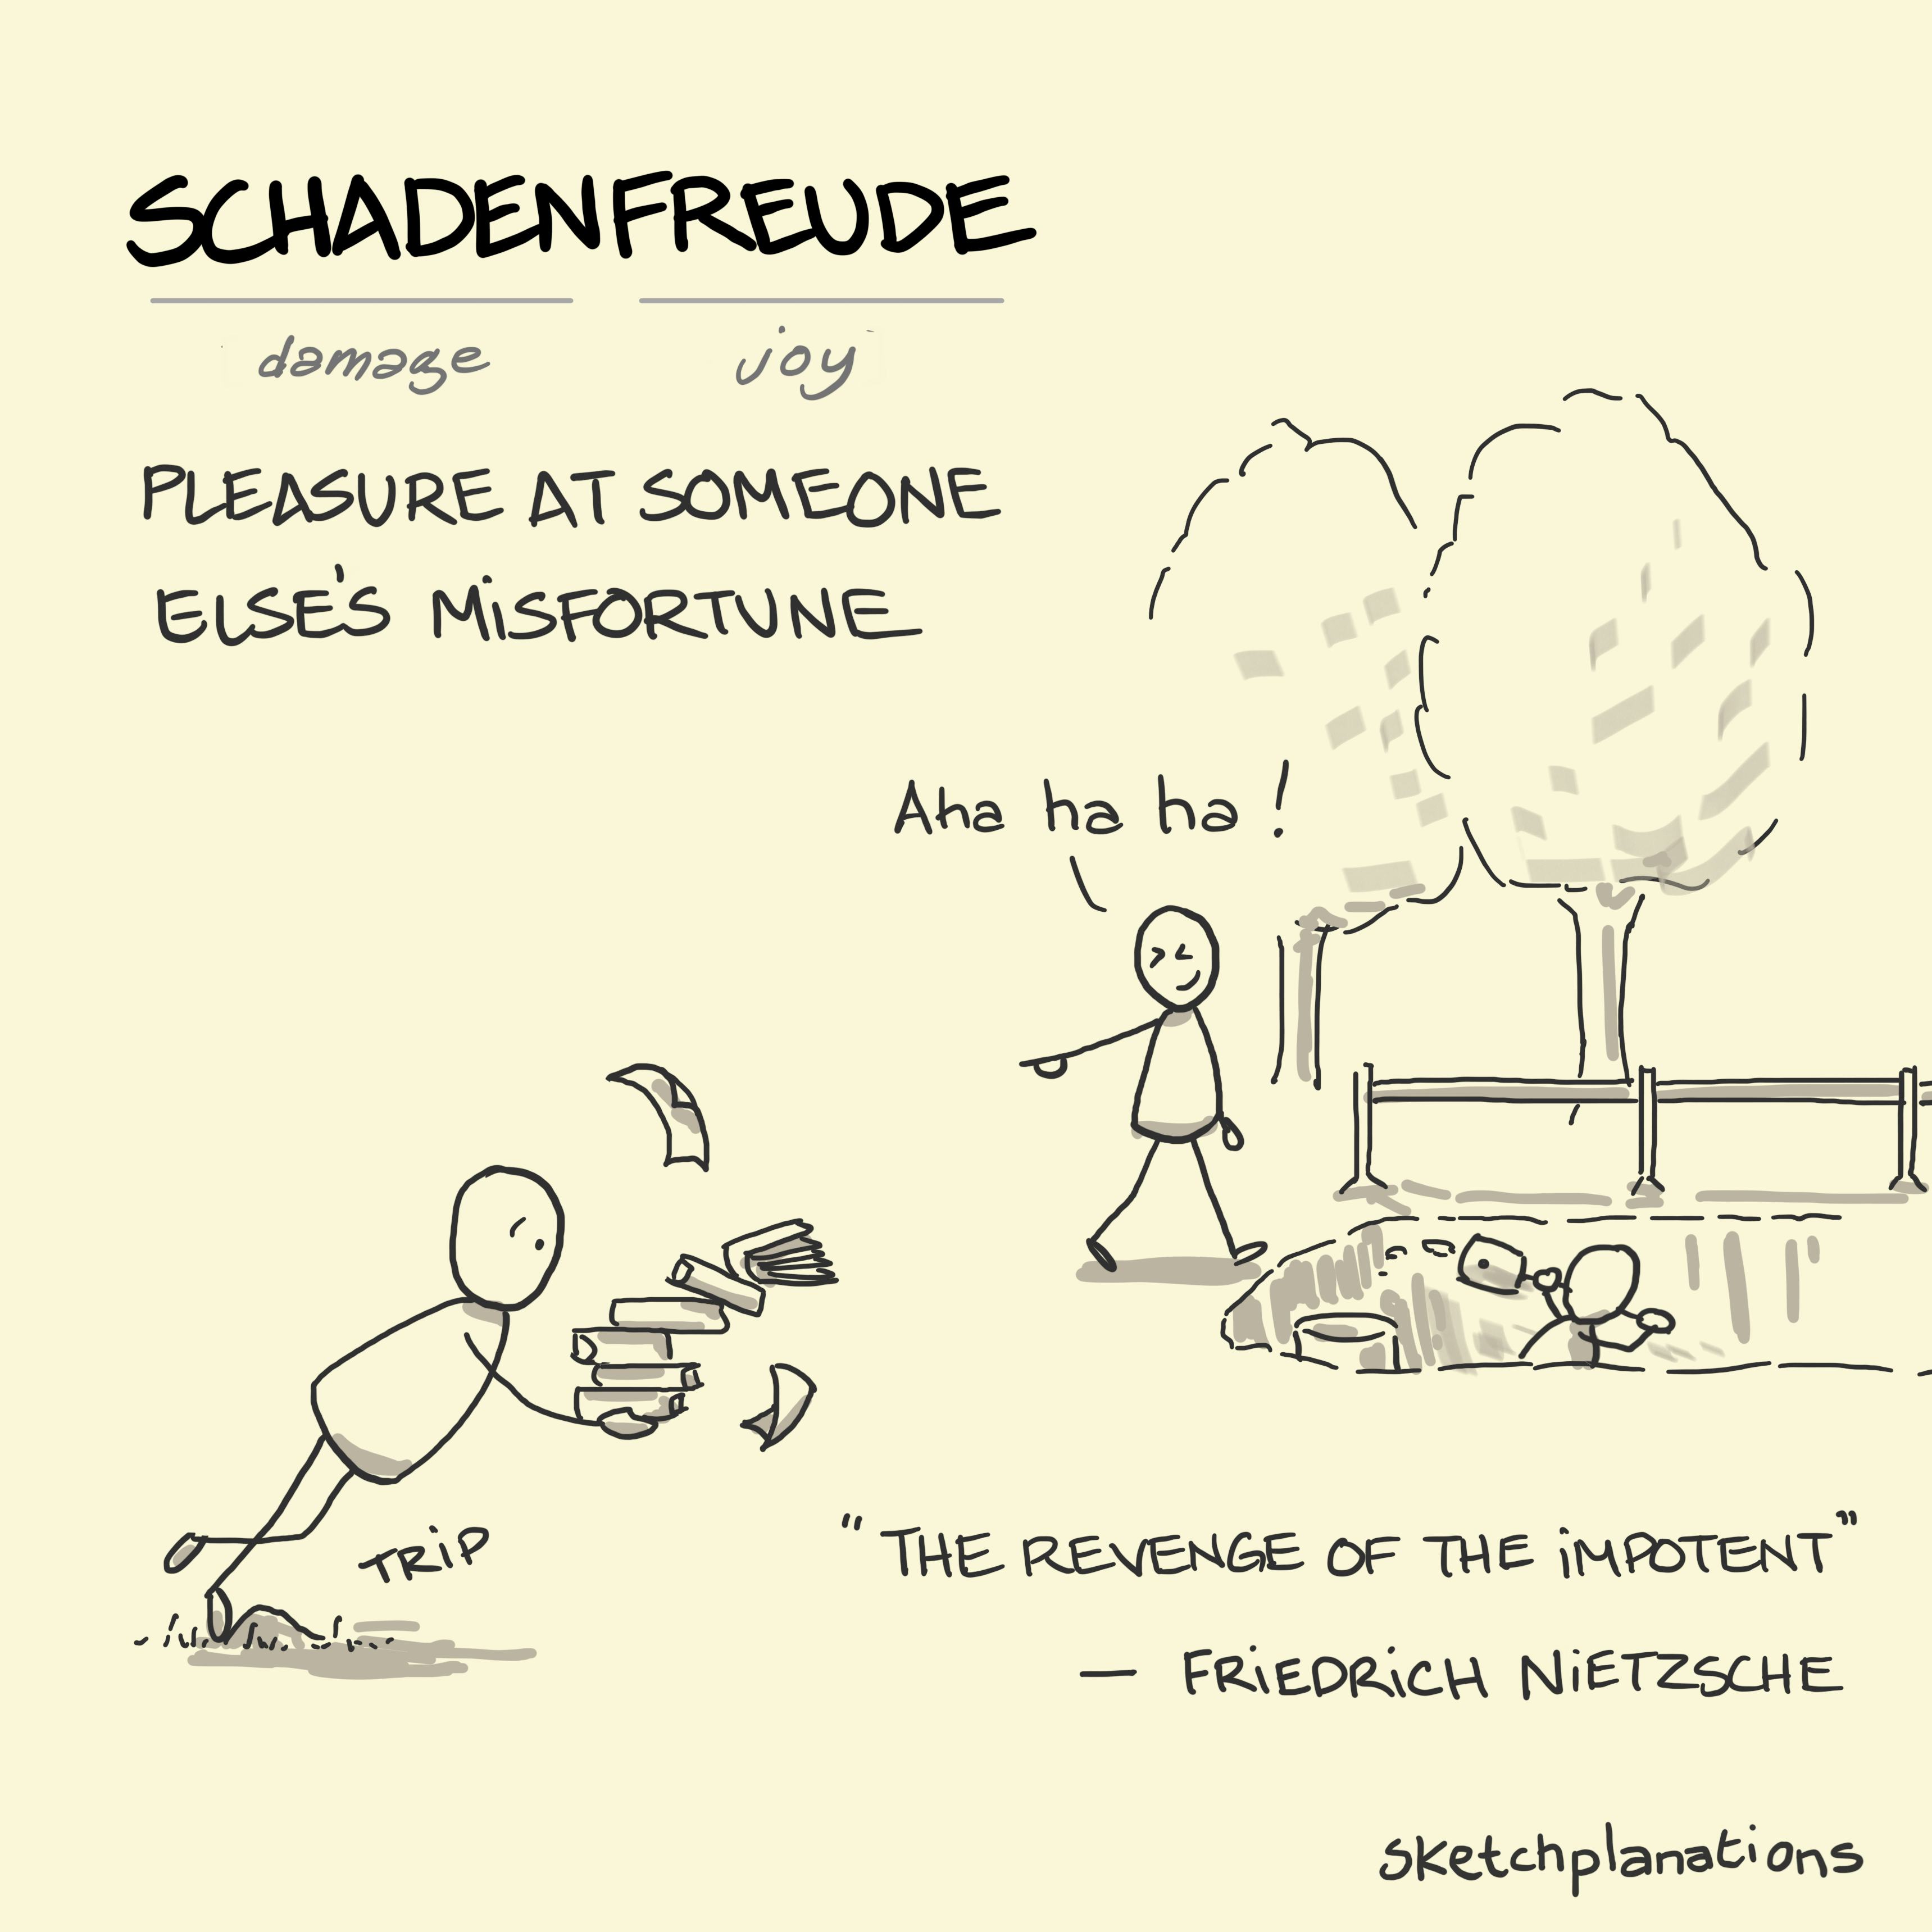 Schadenfreude illustration: a double layer of schadenfreude as an onlooker laughing at someone tripping is about to fall into a hole and get their comeuppance